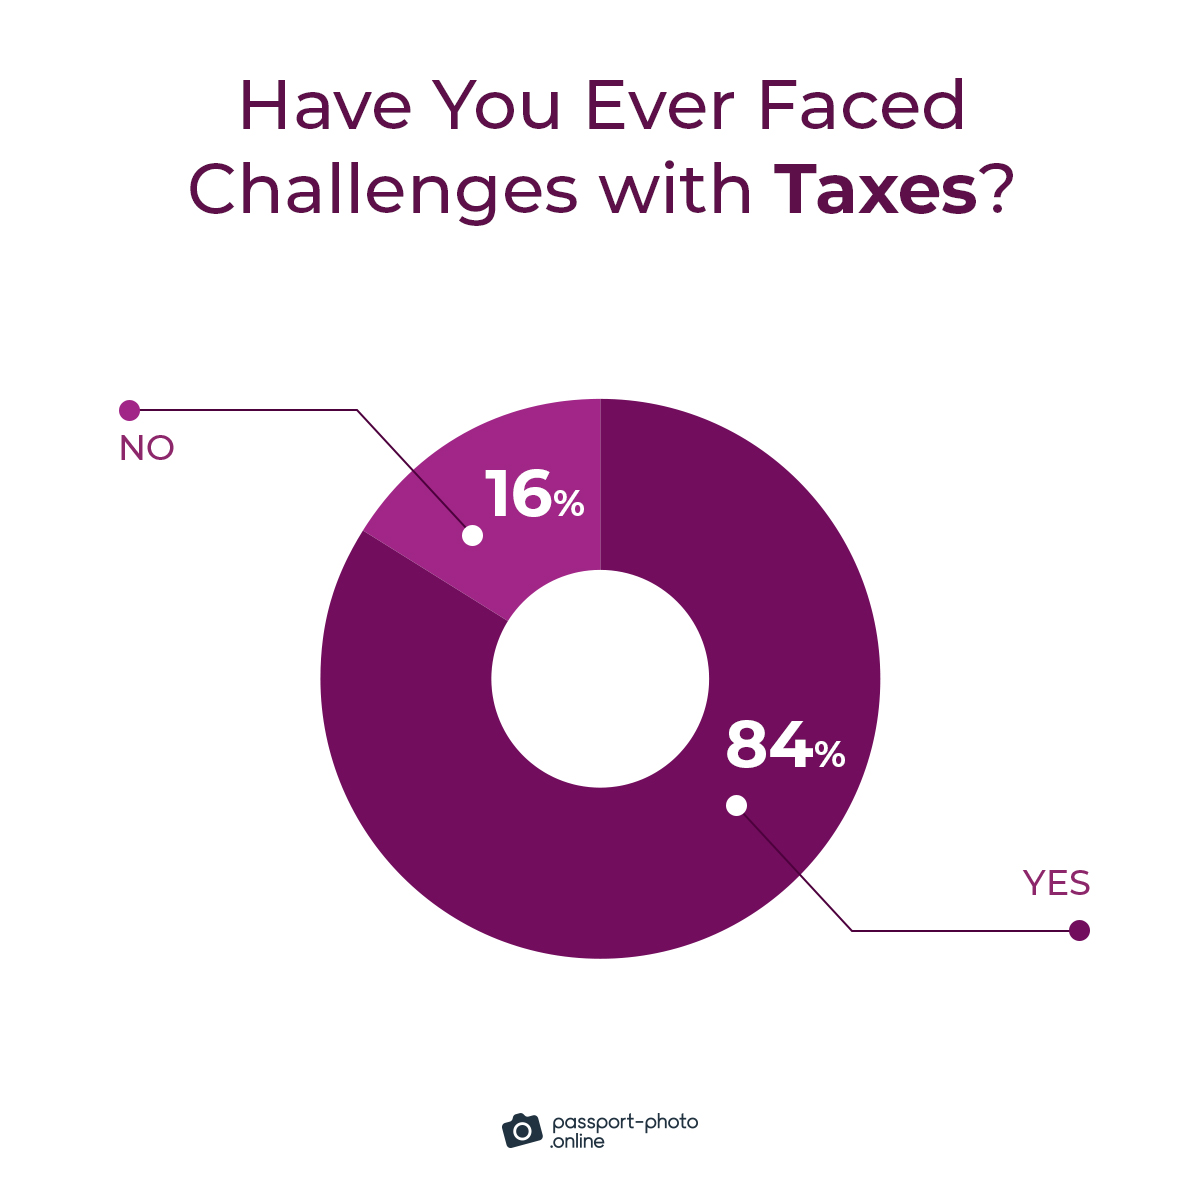 84% of digital nomads claim they’ve faced tax challenges at least once